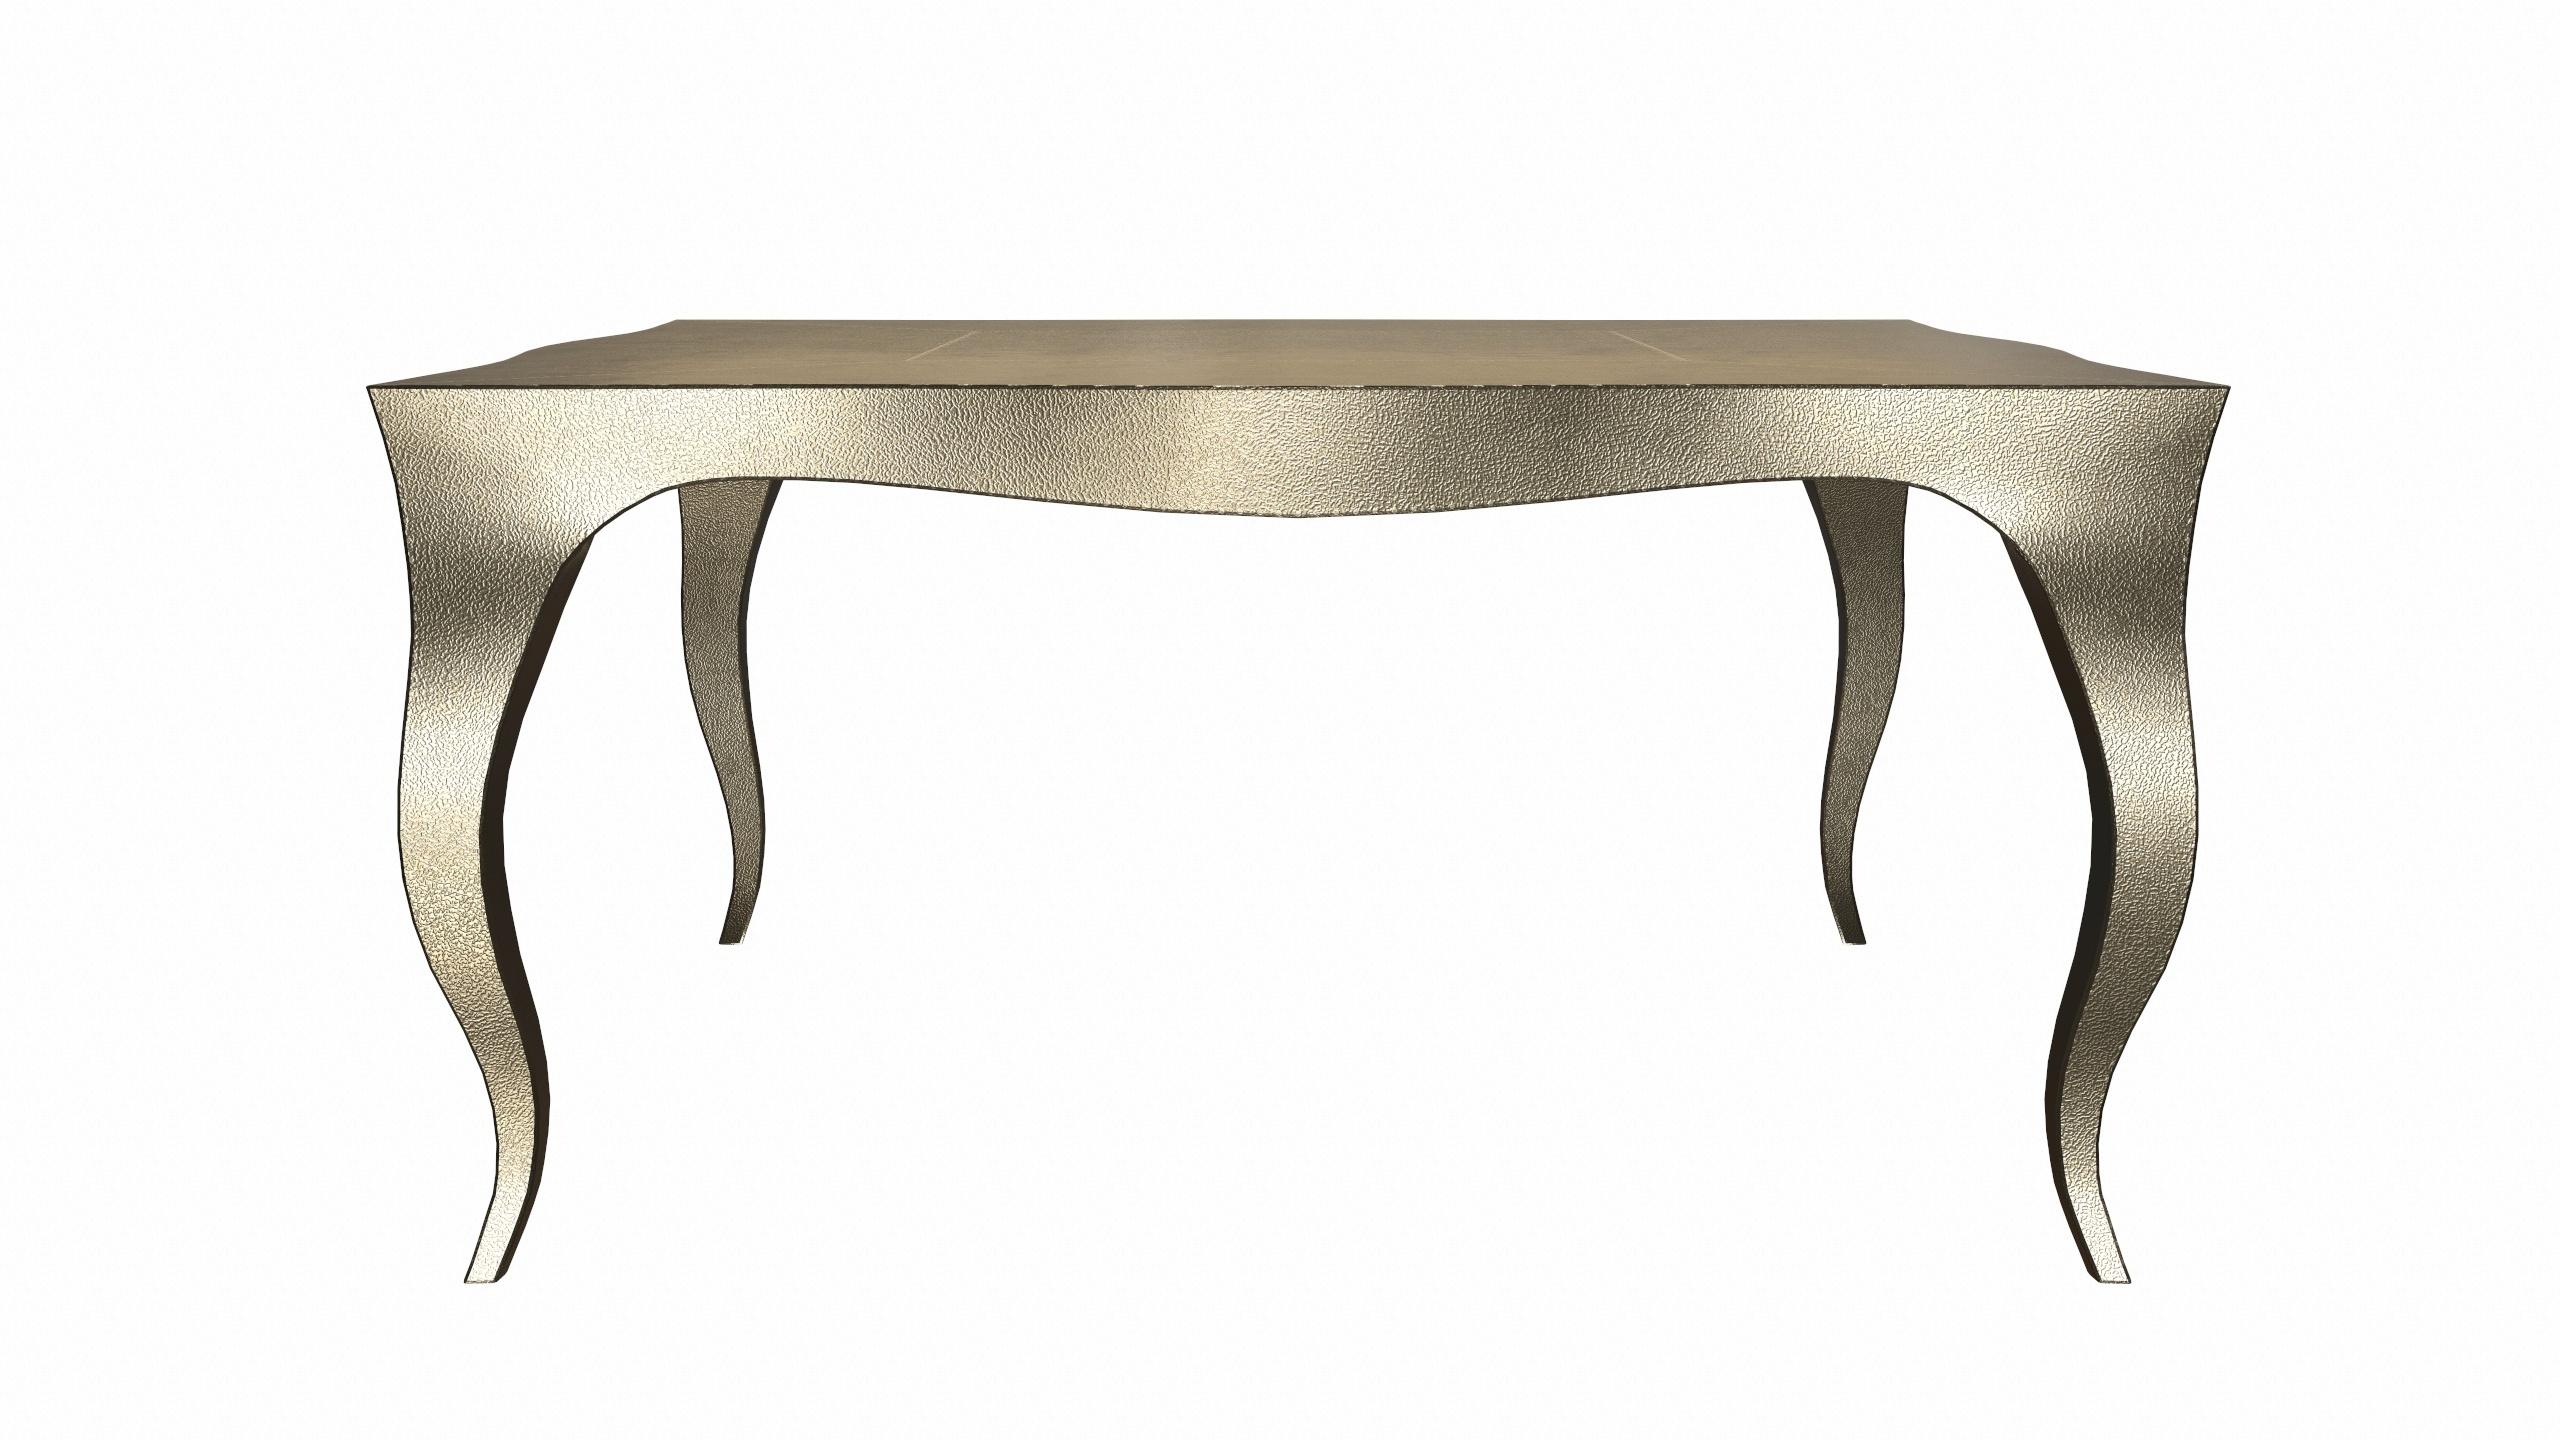 American Louise Art Deco Coffee and Cocktail Tables Fine Hammered Brass 18.5x18.5x10 inch For Sale